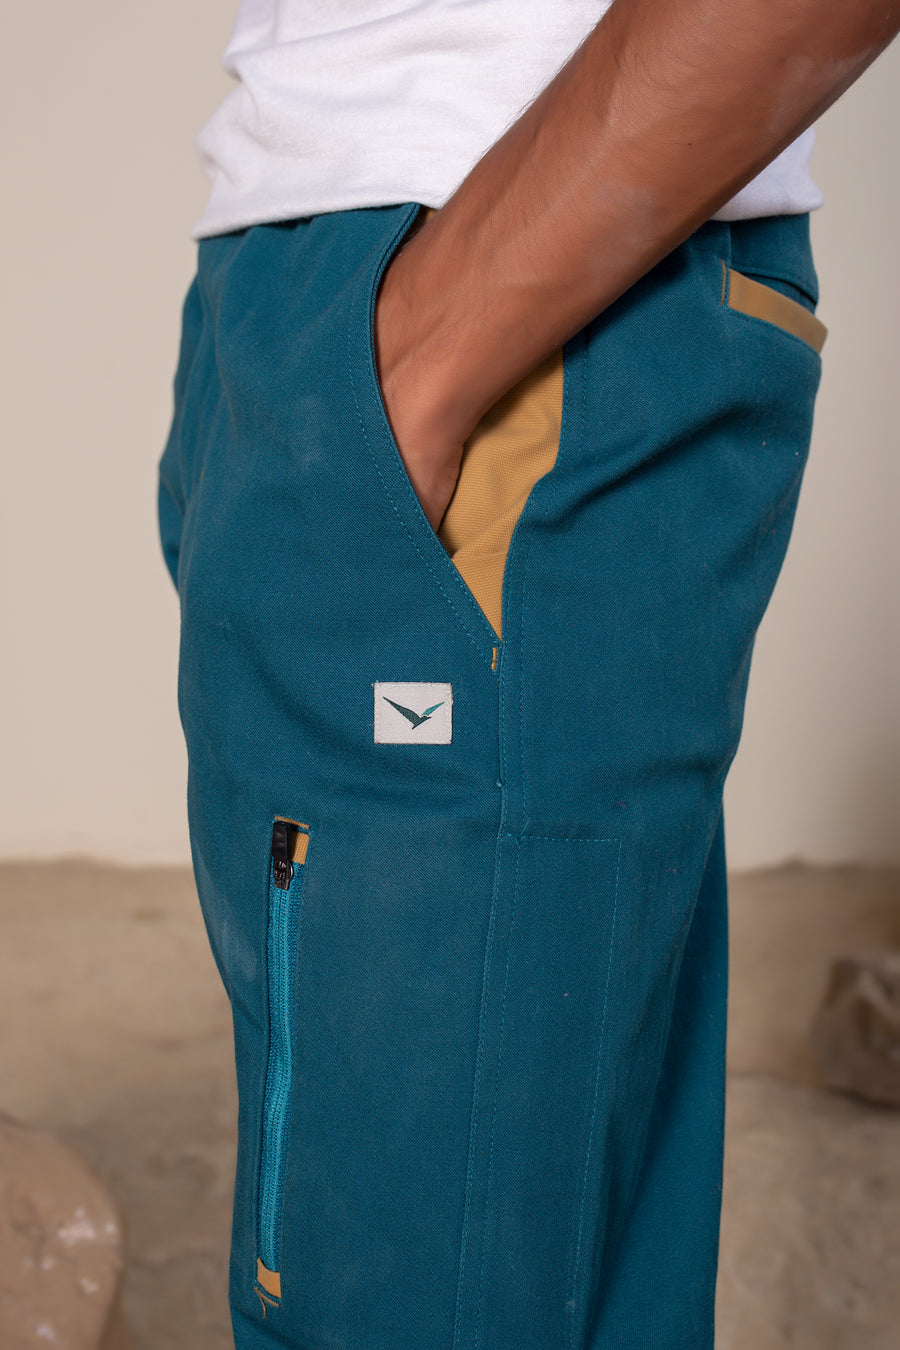 Men's Sequoia Canvas Pant in Teal | VOLO Apparel | Made with an ultra durable stretch cotton canvas, the Sequoia Canvas Pant is our ultimate six pocket lifestyle pant. Featuring a modern slim fit and a 33 inch inseam, a 3 point gusset, snap button security pockets, 2 zipper pockets and the comfort of durable canvas, these are your go to adventure pants that can handle anything you throw at them.